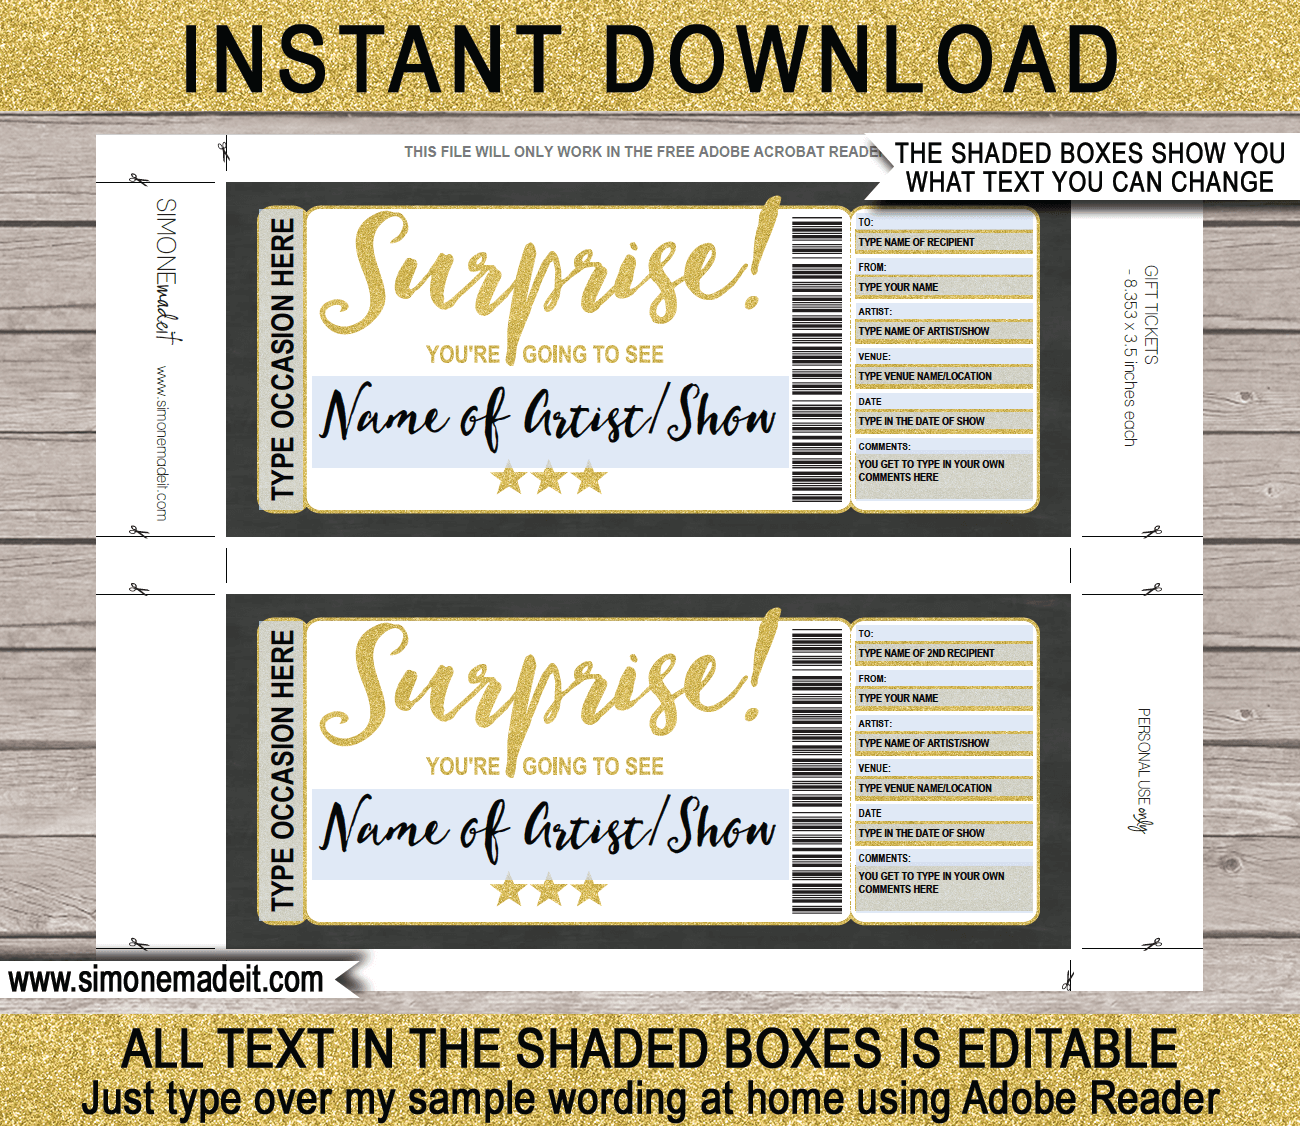 Printable NEW PUPPY / DOG Surprise Gift Reveal Coupon. Instant